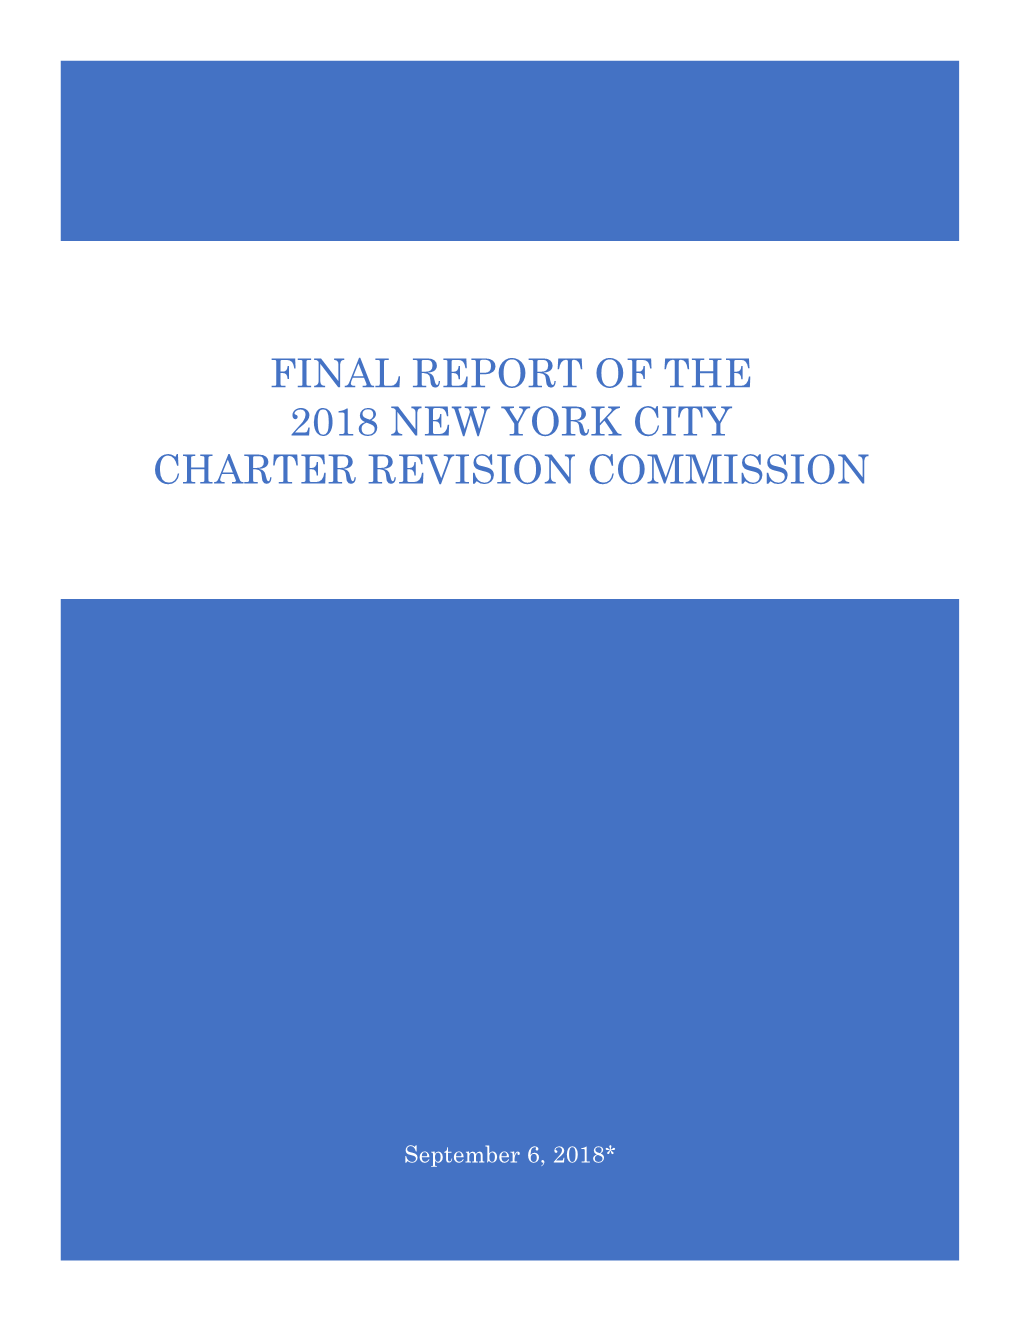 Final Report of the 2018 New York City Charter Revision Commission